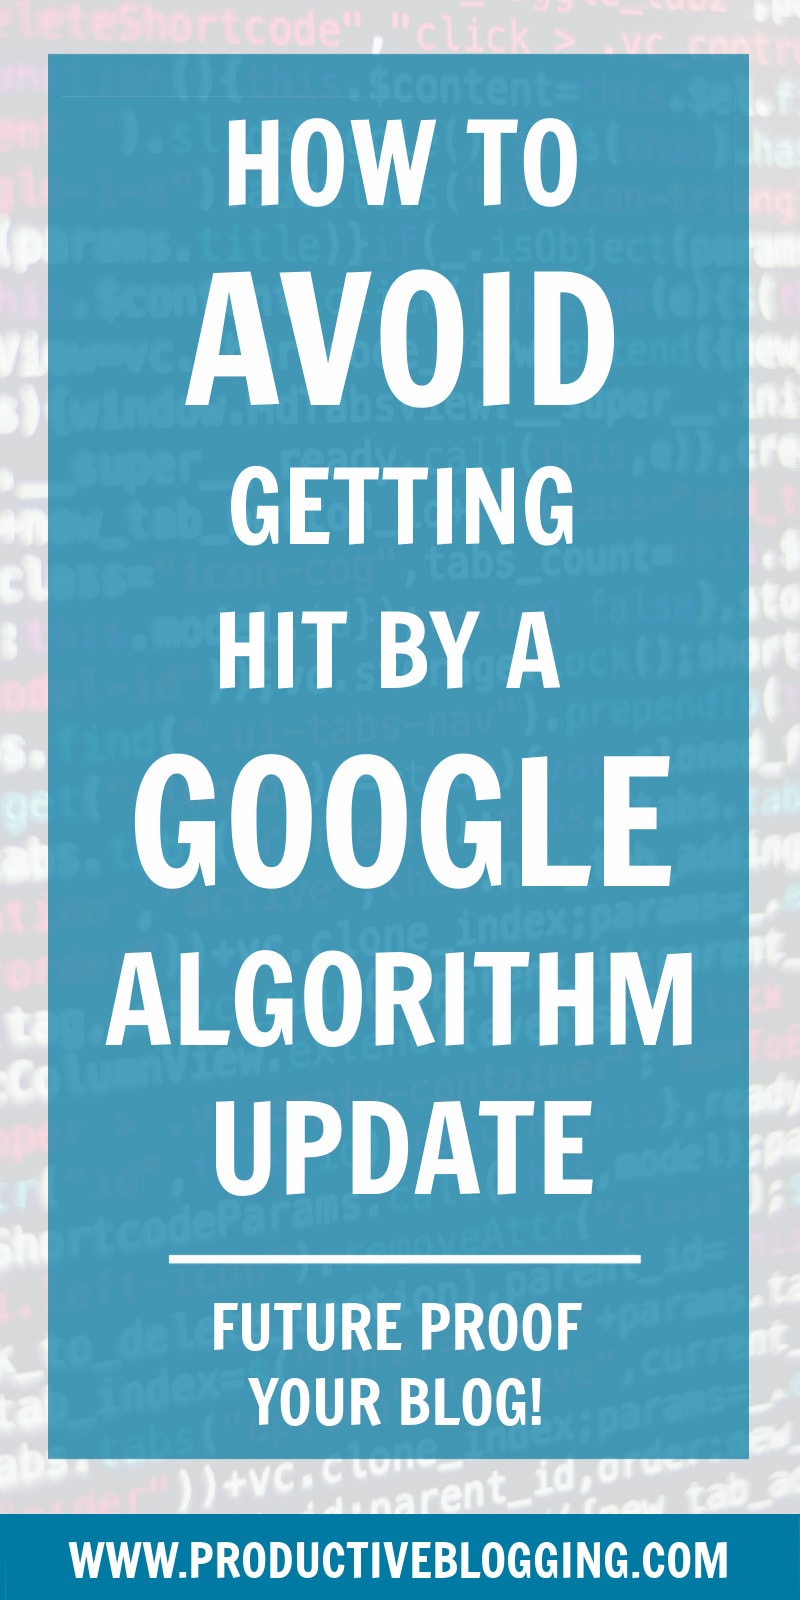 Google is constantly updating its algorithm. Updates can either help or hurt your website. Here’s how to avoid getting hurt by a Google algorithm update #google #googleupdate #googlealgorithm #googlealgorithmupdate #SEOforbloggers #SEOforbeginners #beginnersSEO #SEO #SEOtips #SEOhacks #searchengineoptimisation #searchengineoptimization #keywords #growyourblog #bloggrowth #bloggrowthhacks #bloggingtips #blogginghacks #blogging #bloggers #blogsmarter #blogsmarternotharder #productiveblogging